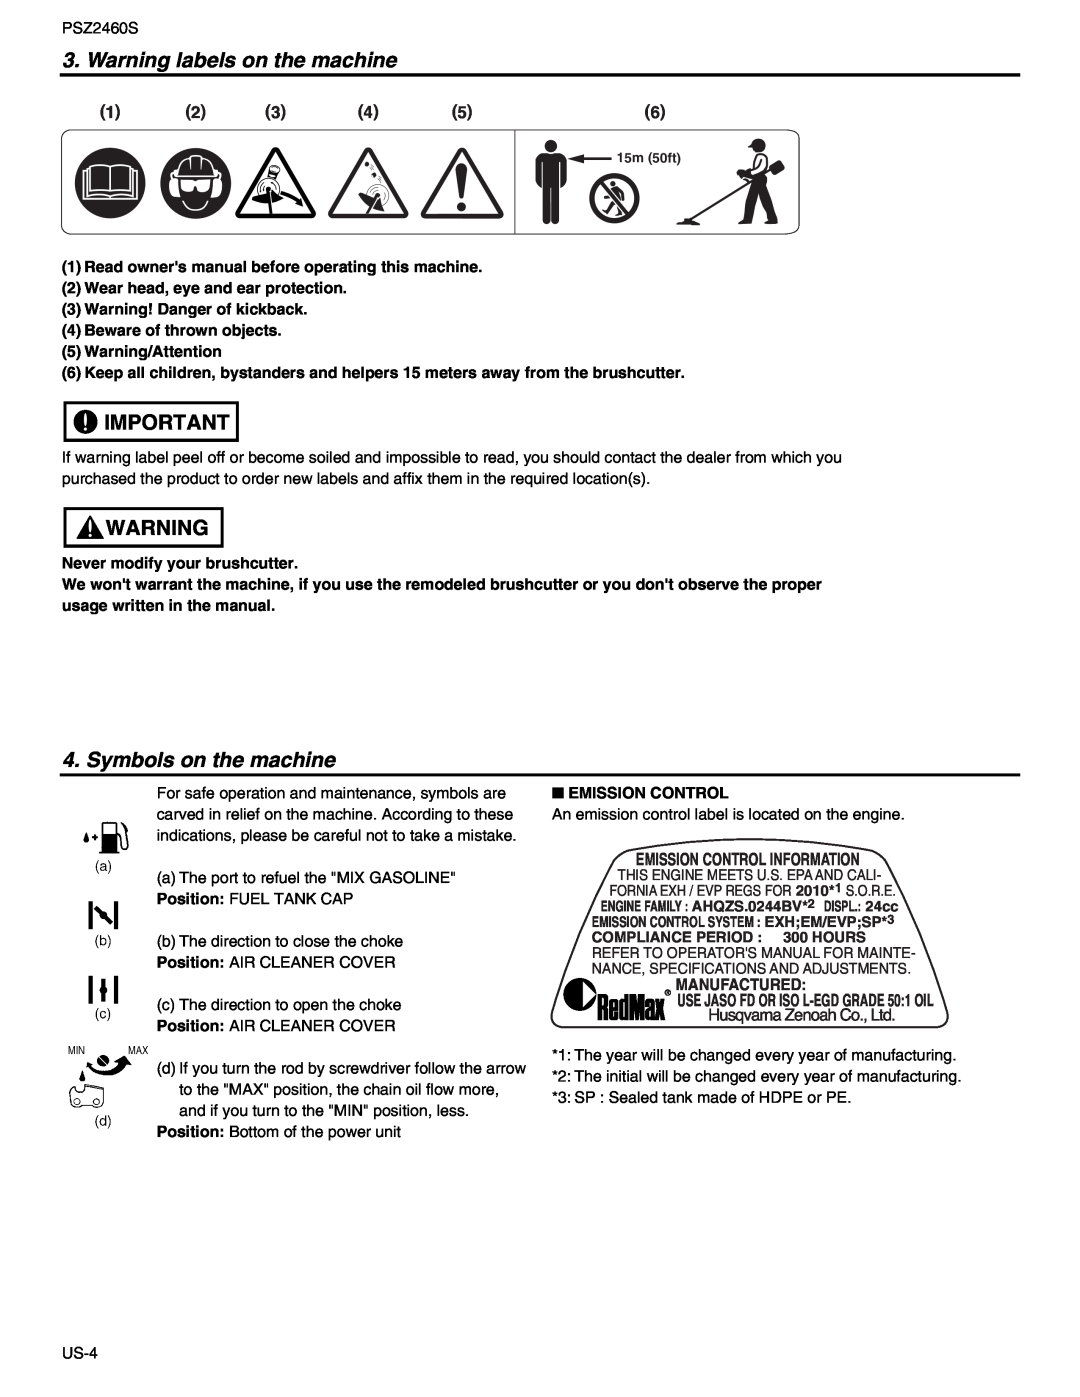 RedMax PSZ2460S manual Warning labels on the machine, Symbols on the machine, Emission Control Information 